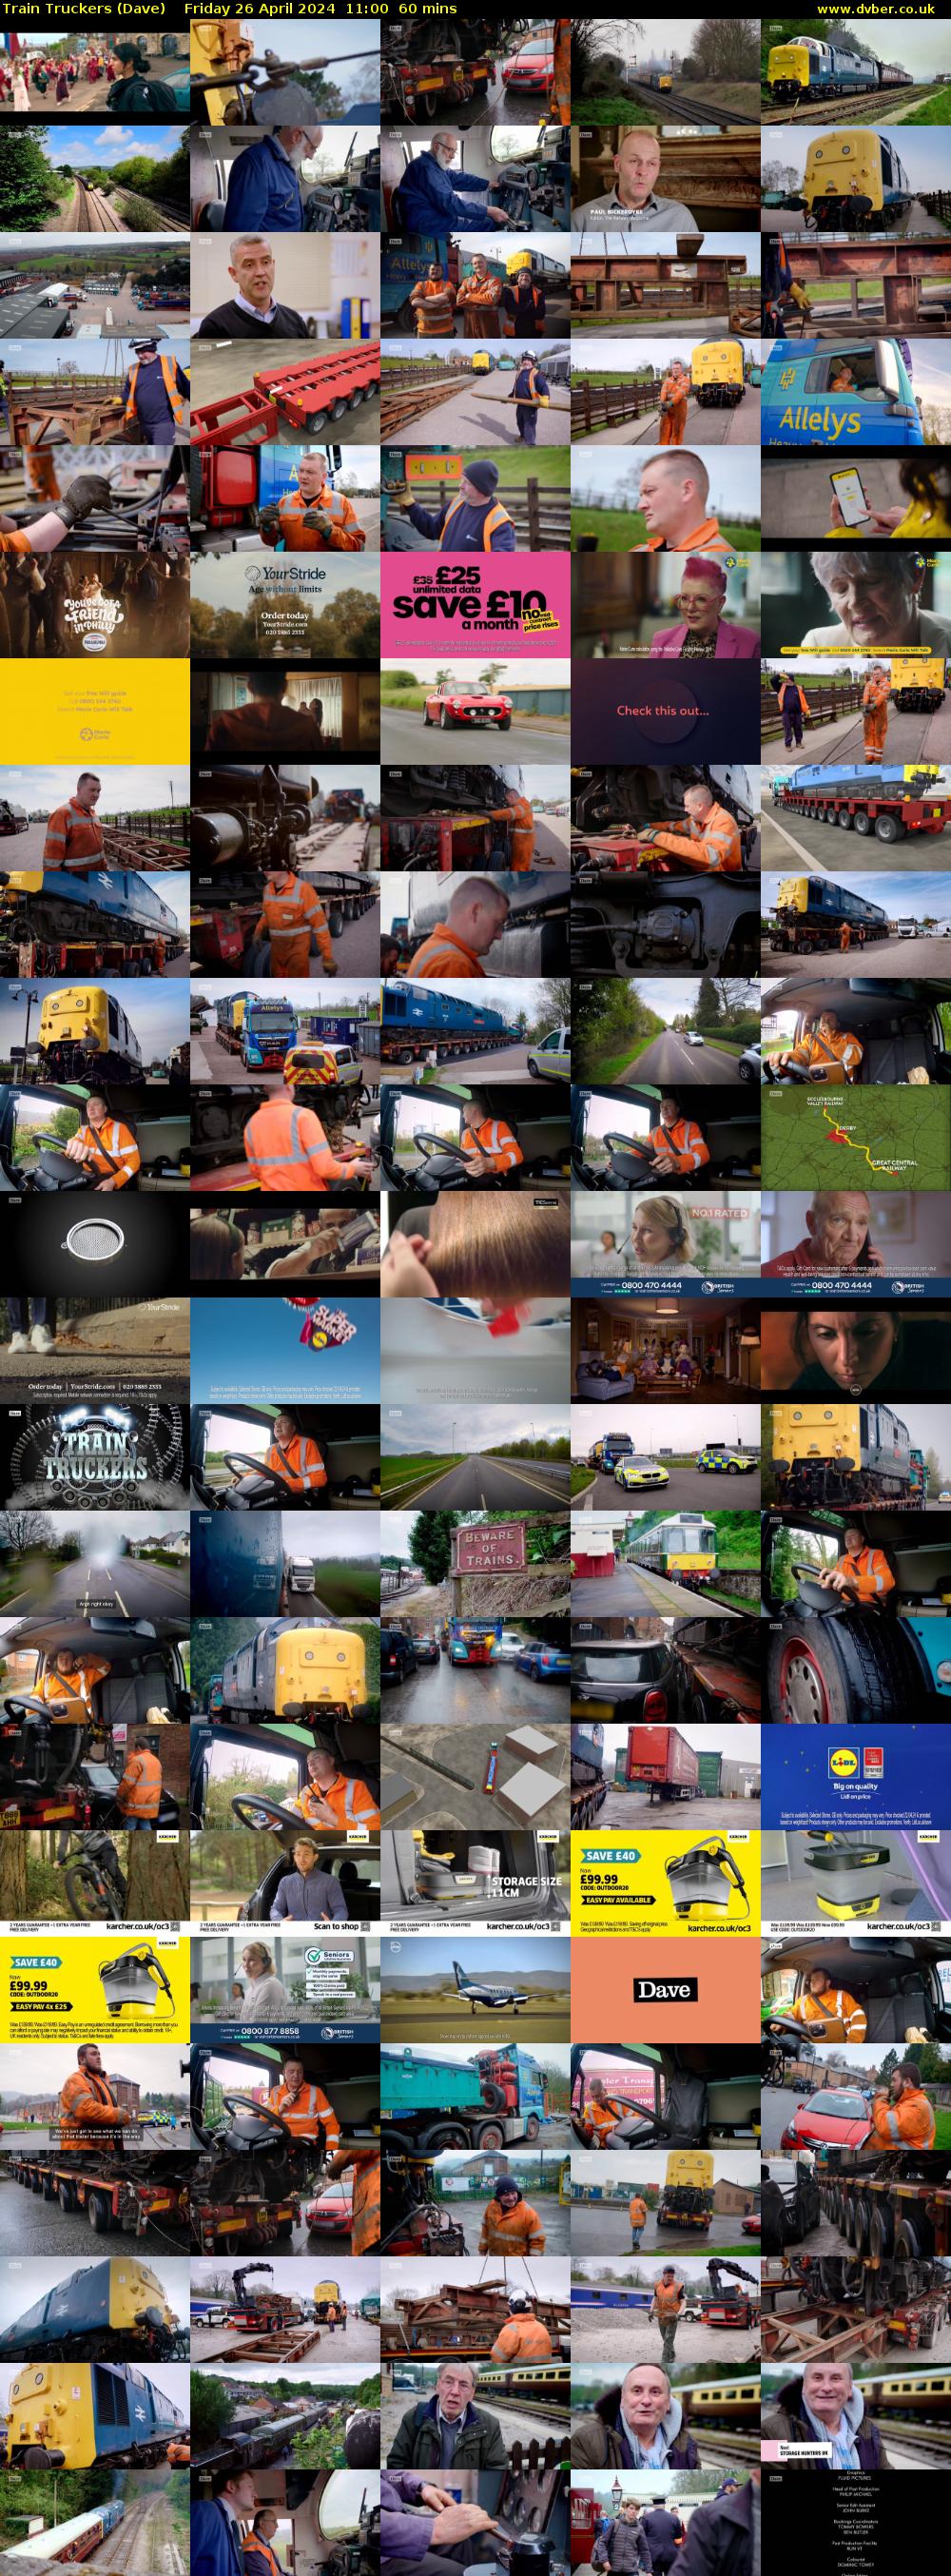 Train Truckers (Dave) Friday 26 April 2024 11:00 - 12:00